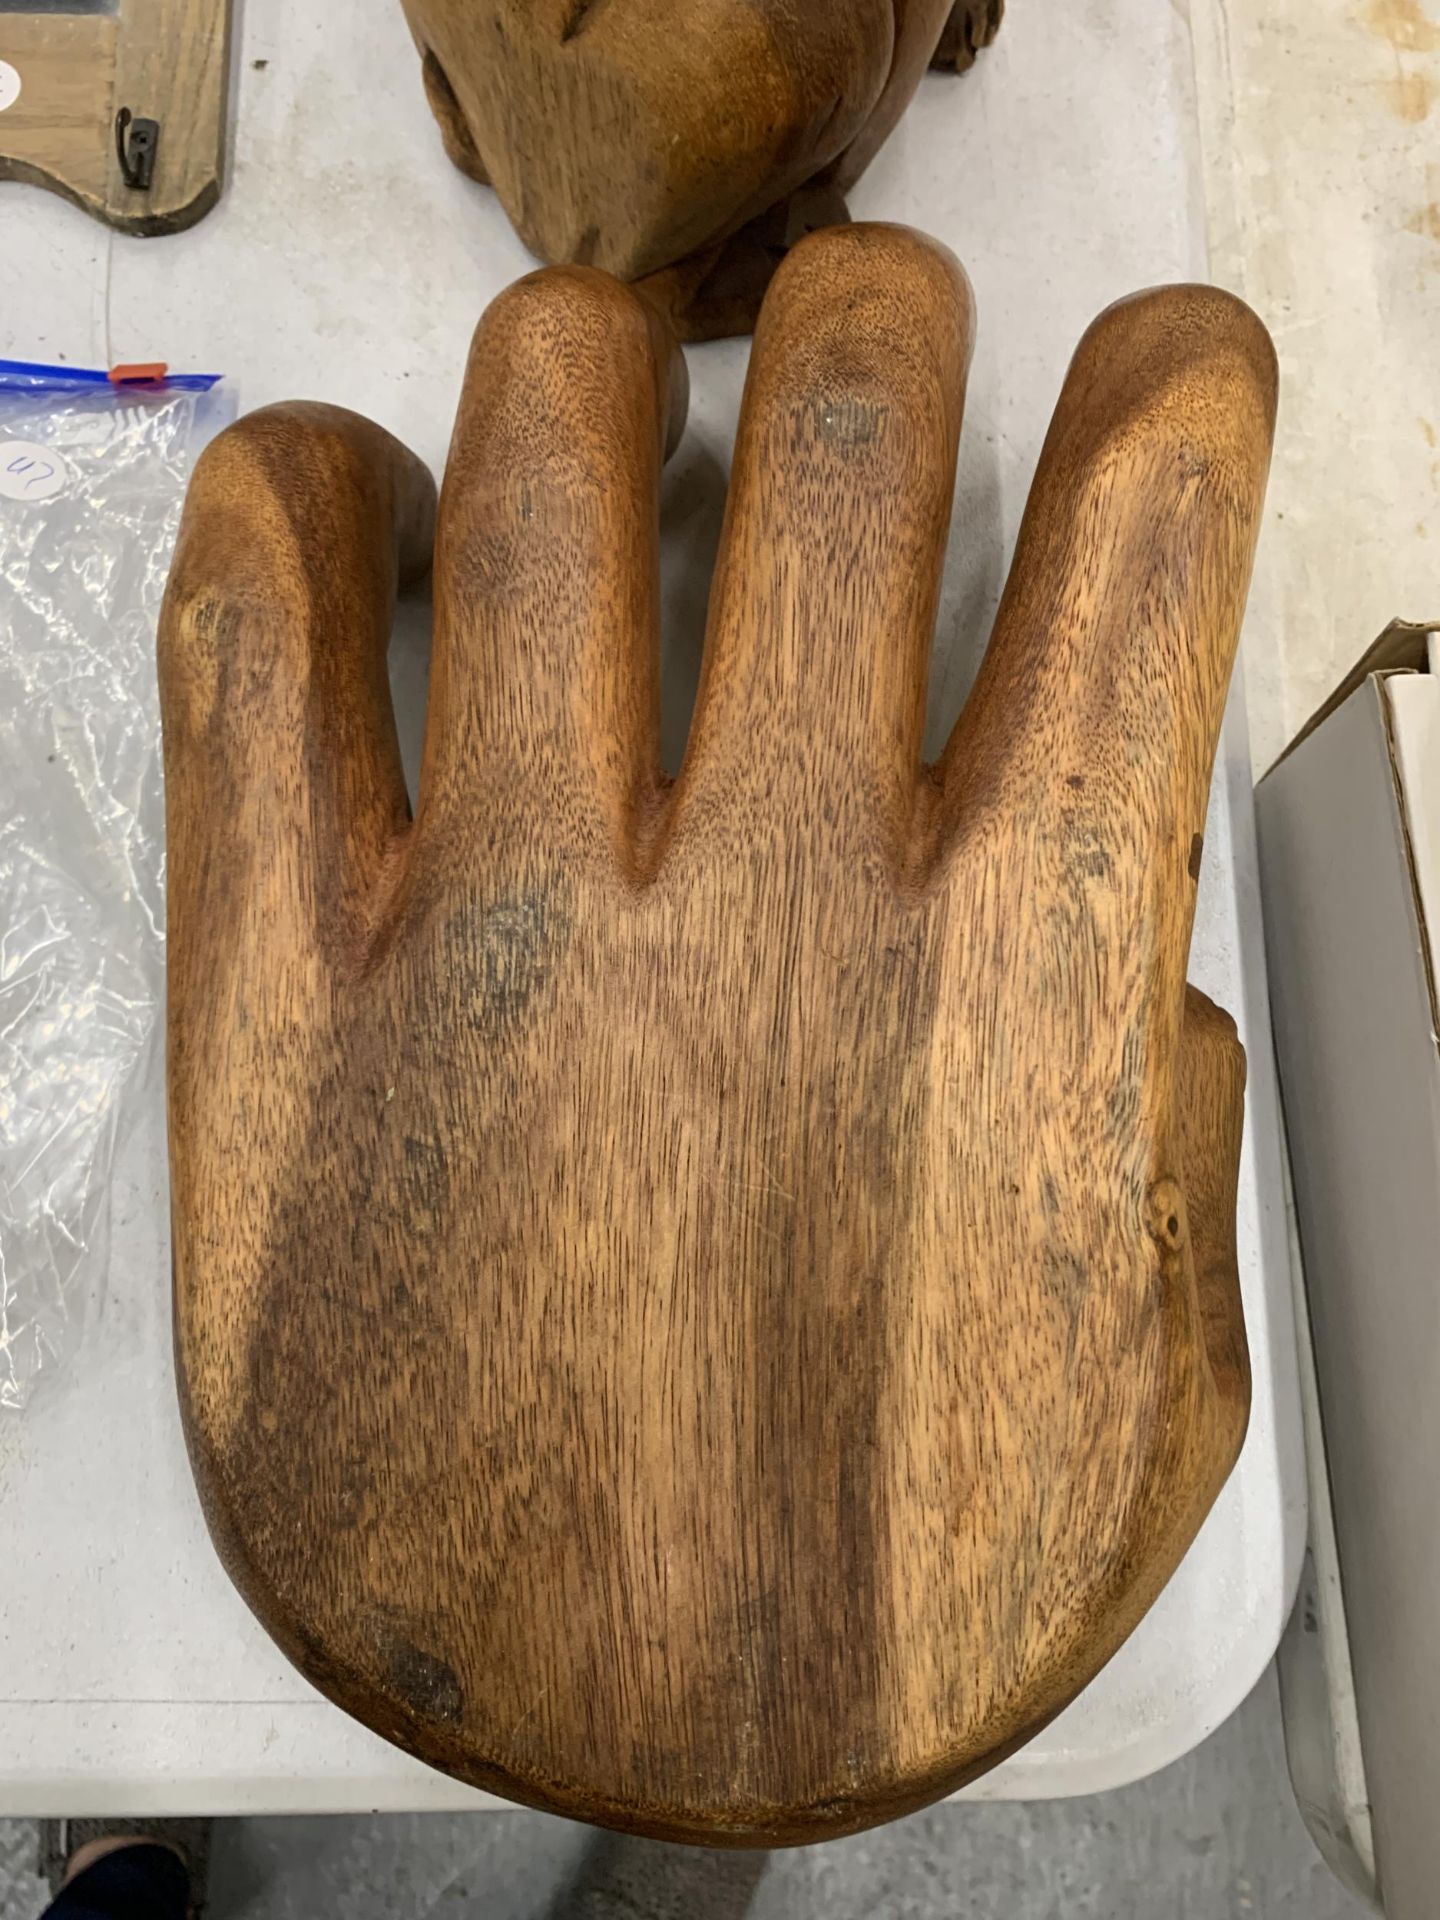 A LARGE CARVED WOODEN HAND, LENGTH 36CM, WIDTH 22CM AND BULLDOG HEIGHT 25CM - Image 5 of 5